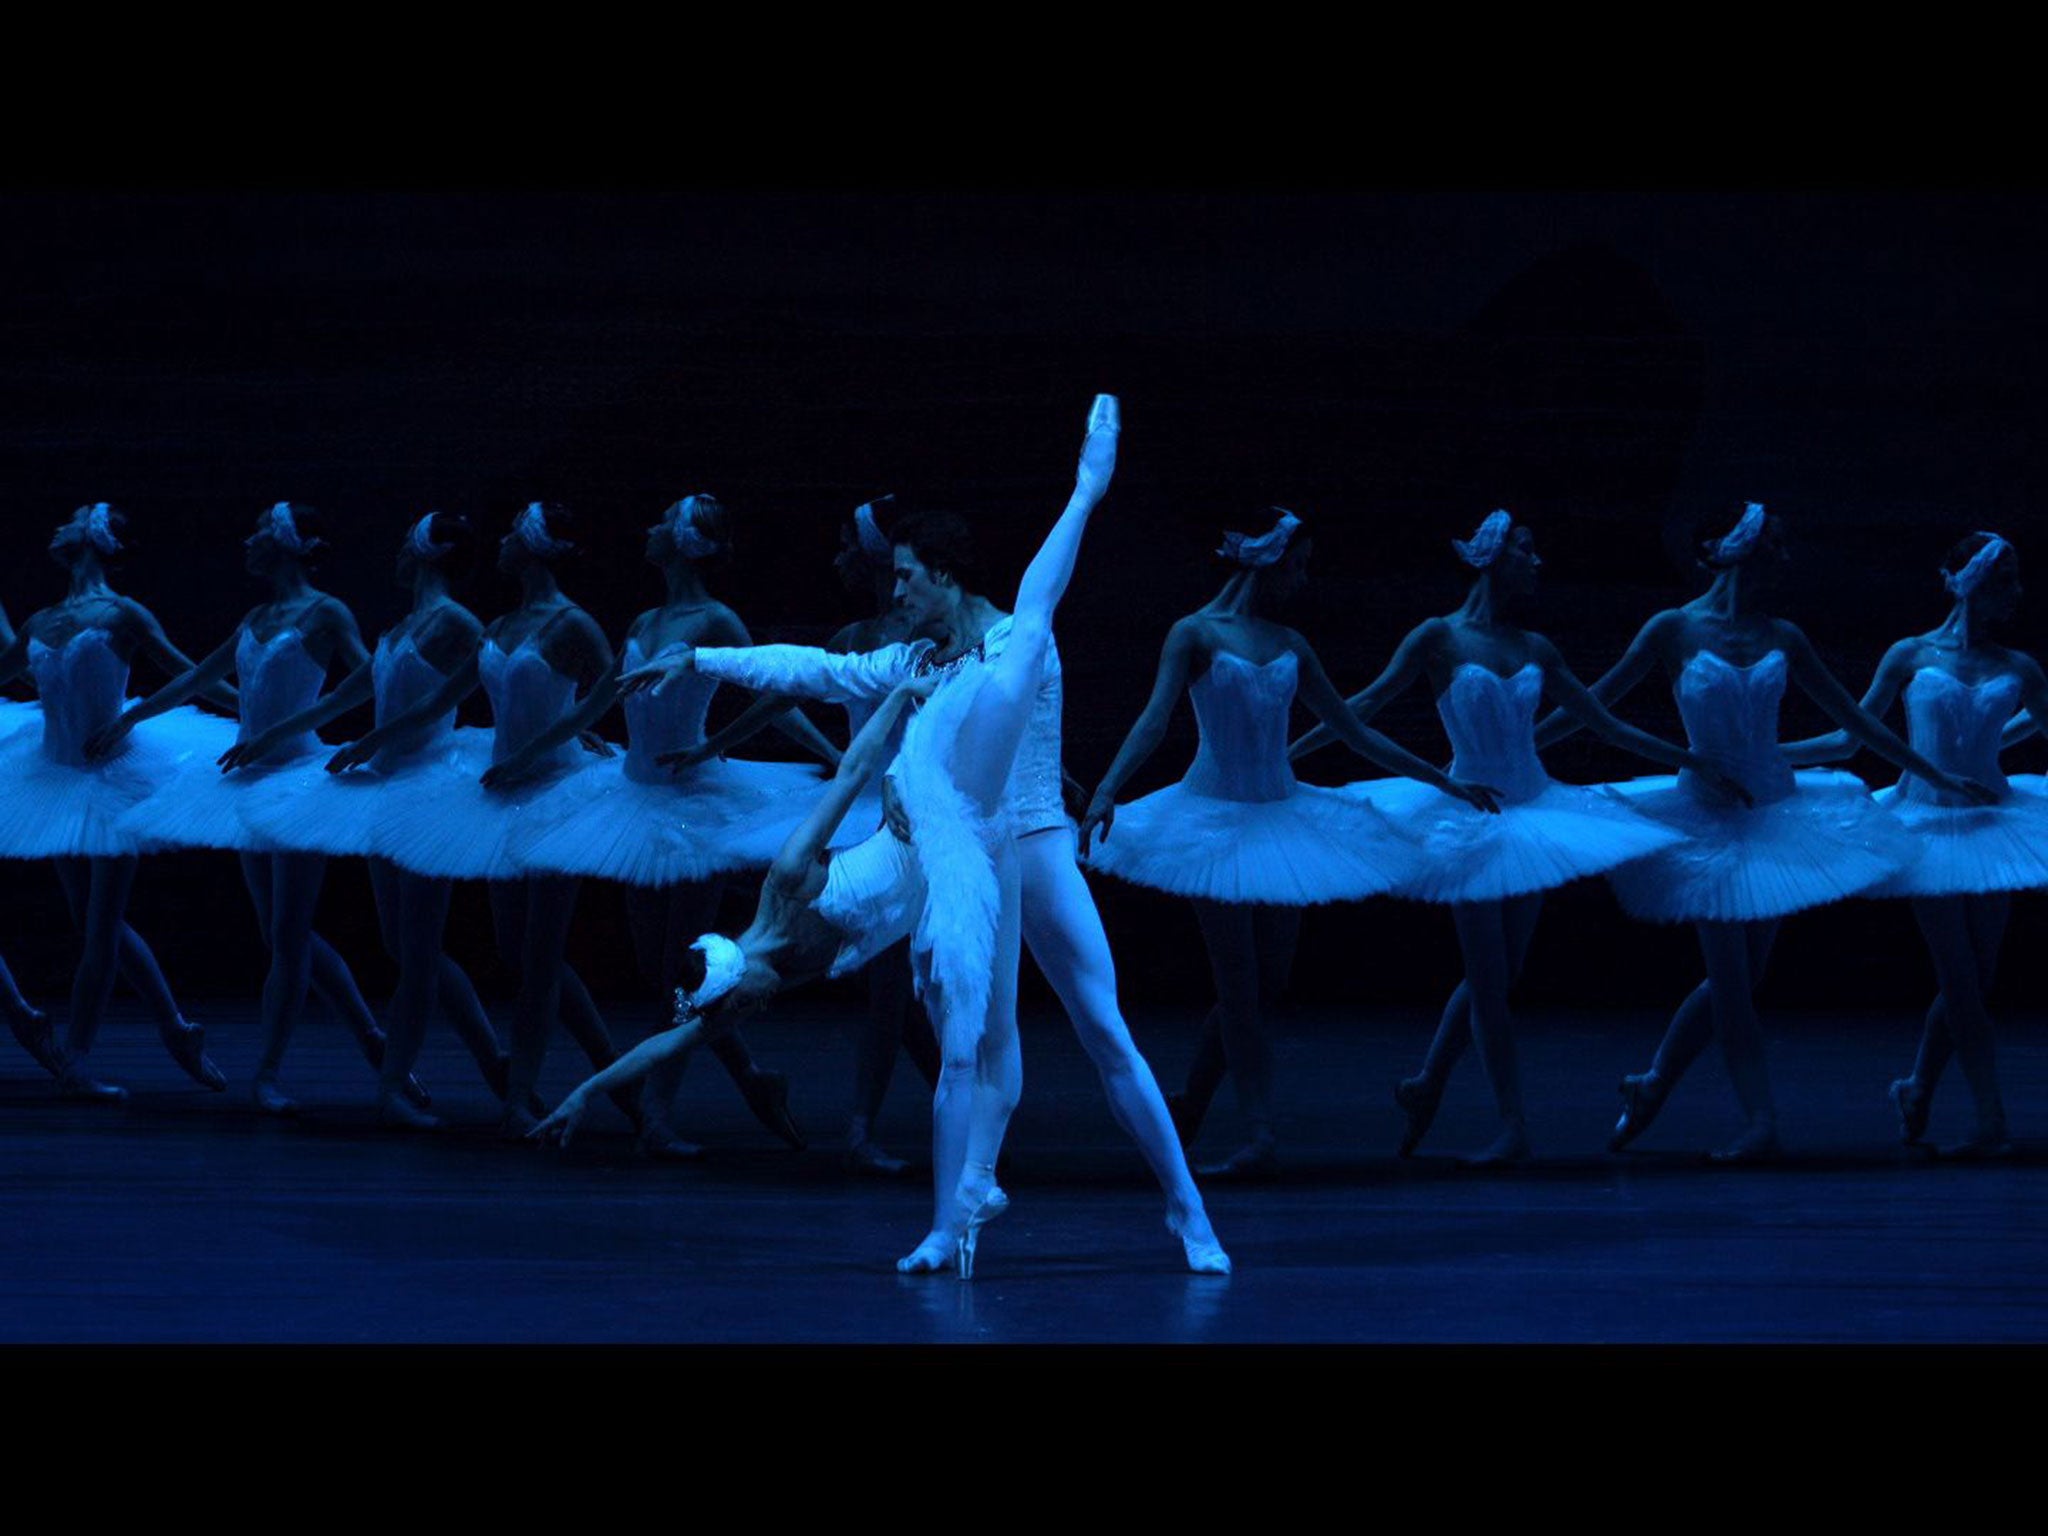 The scenes of the ballet performances, filmed from the wings, are magical